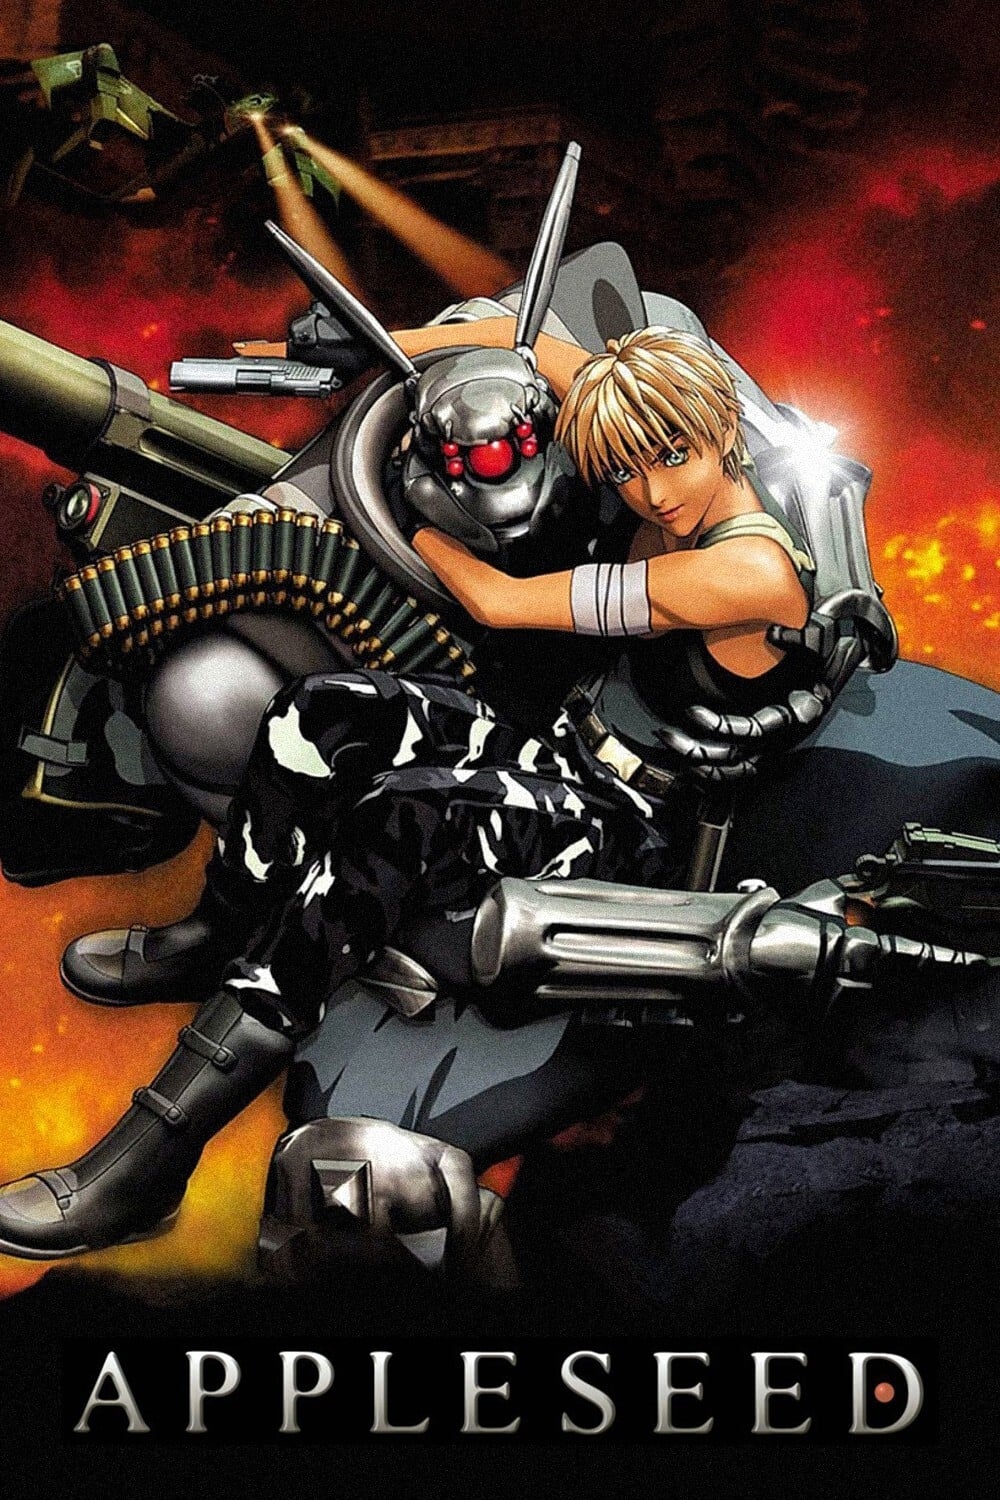 Appleseed: The Beginning (2004)